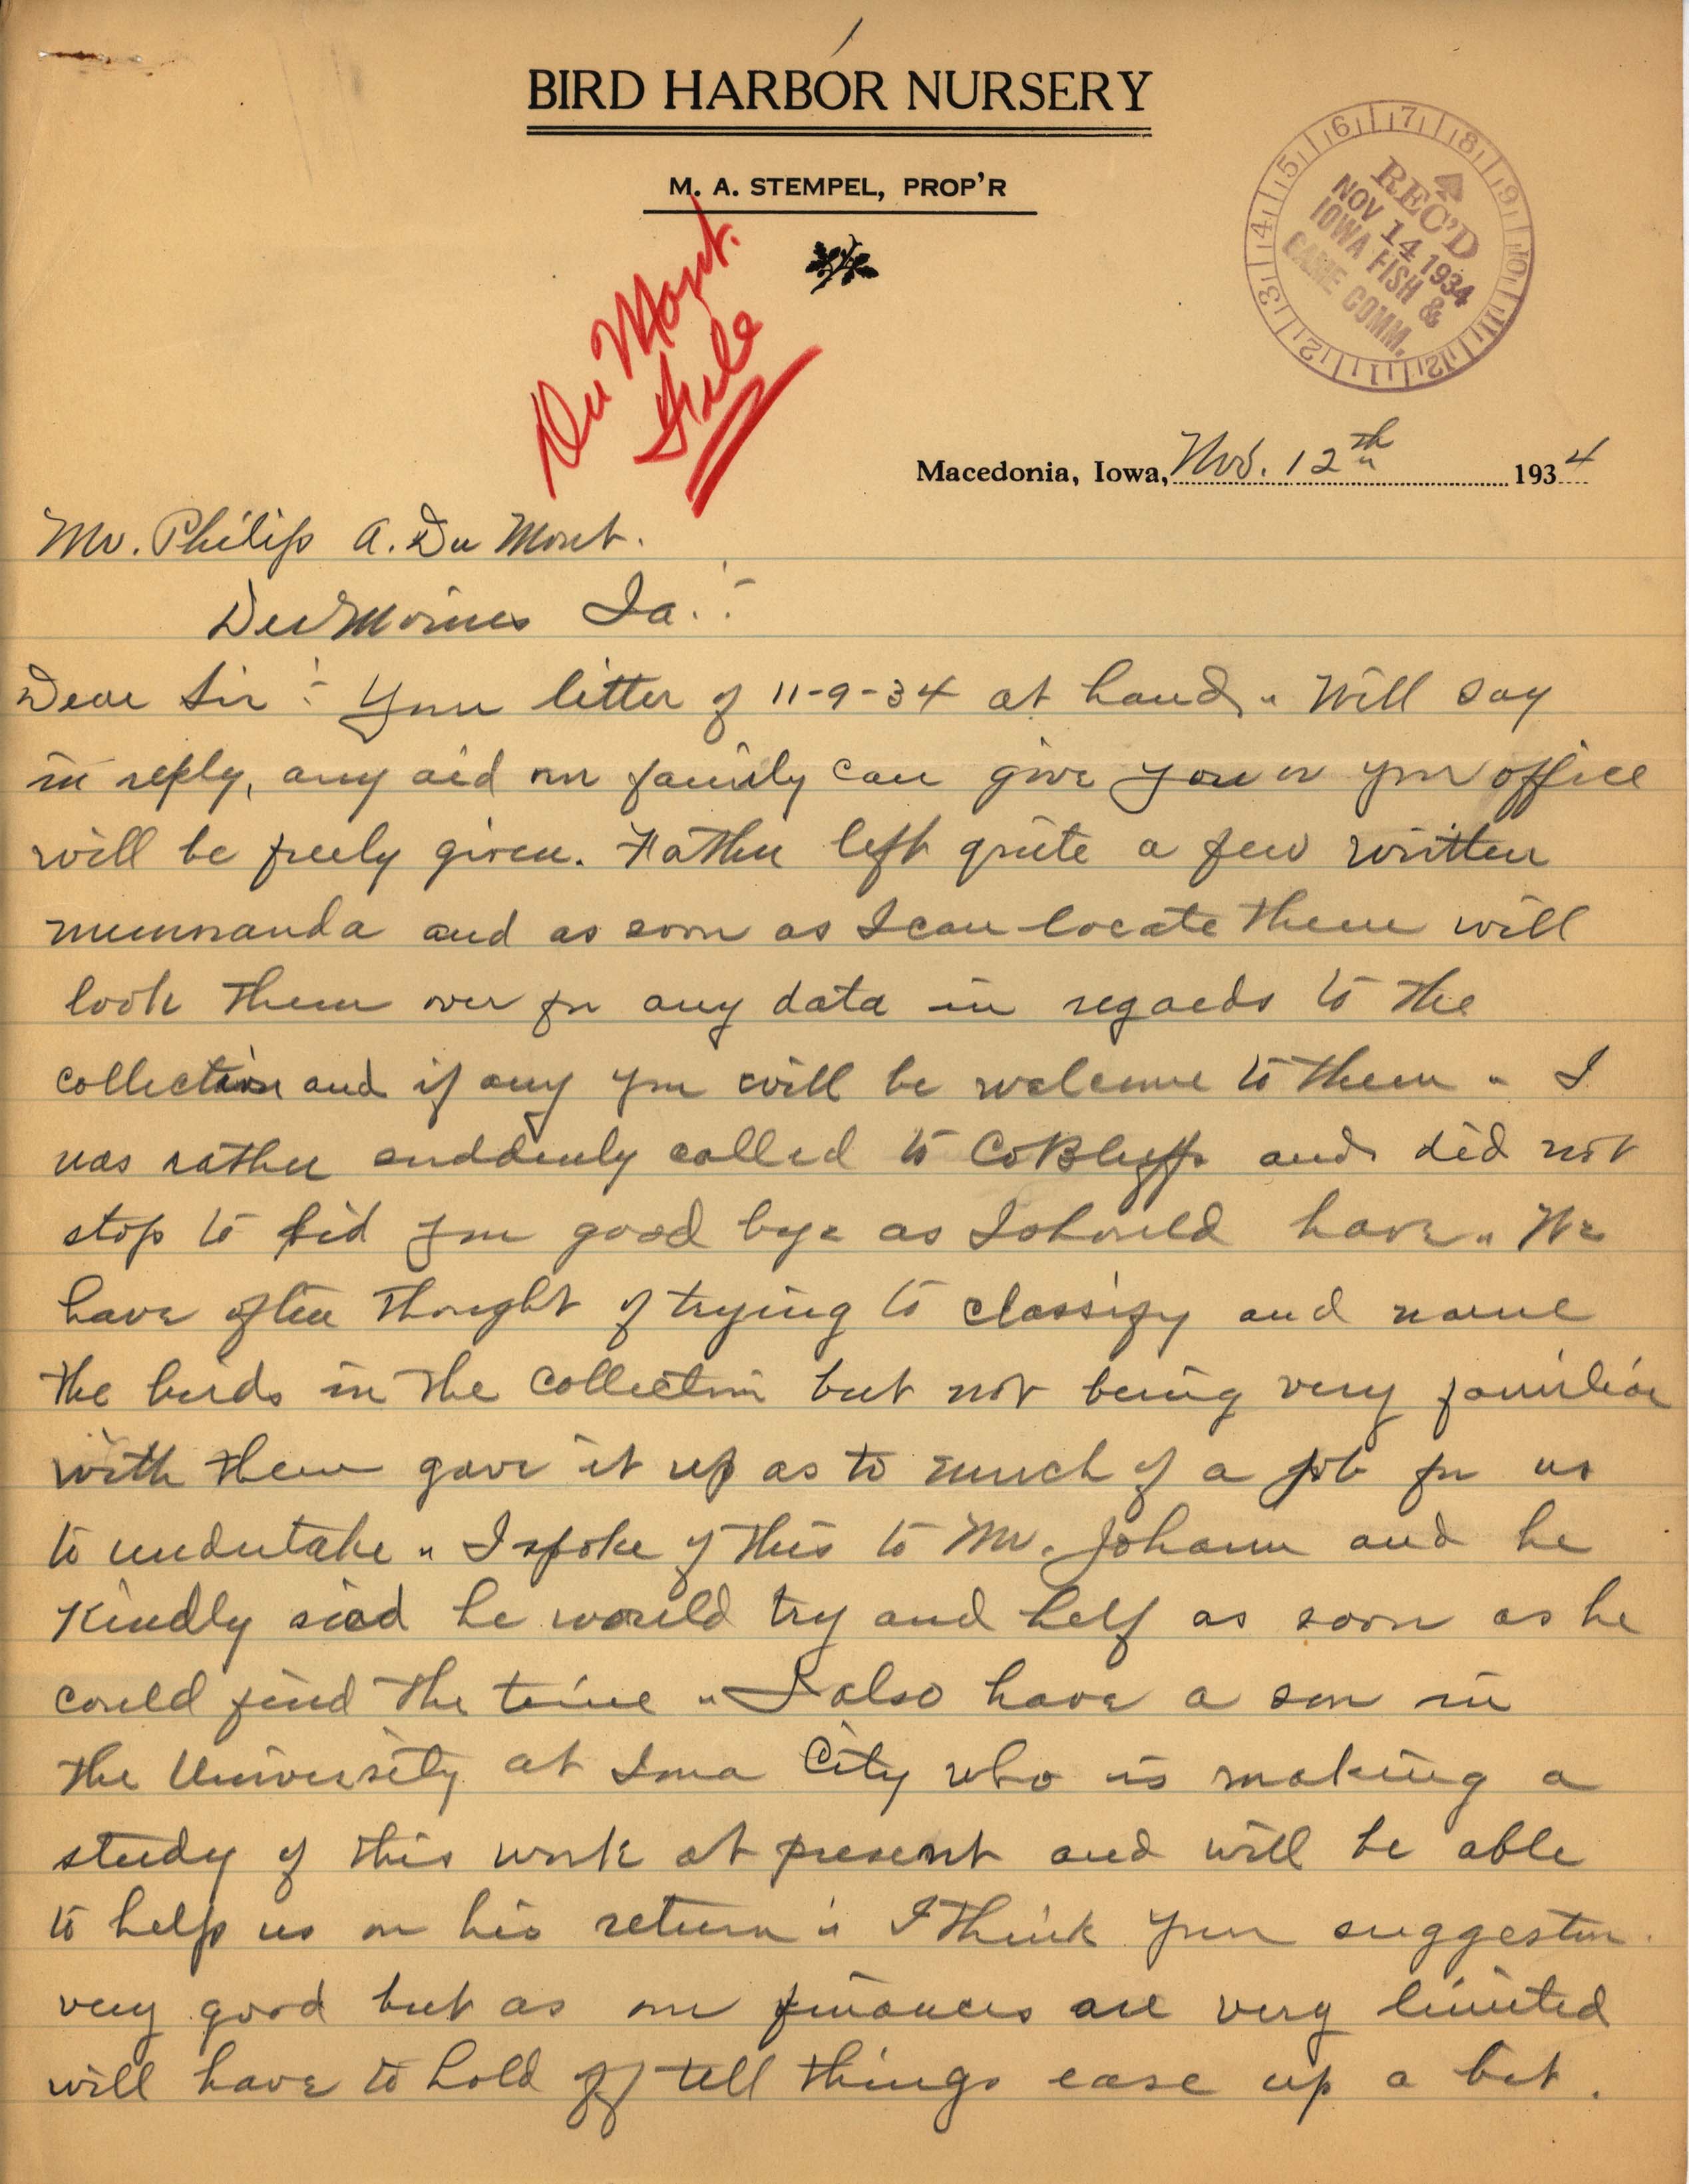 Max Stempel letter to Philip DuMont regarding additional details about specimens in the Stempel collection, November 12, 1934